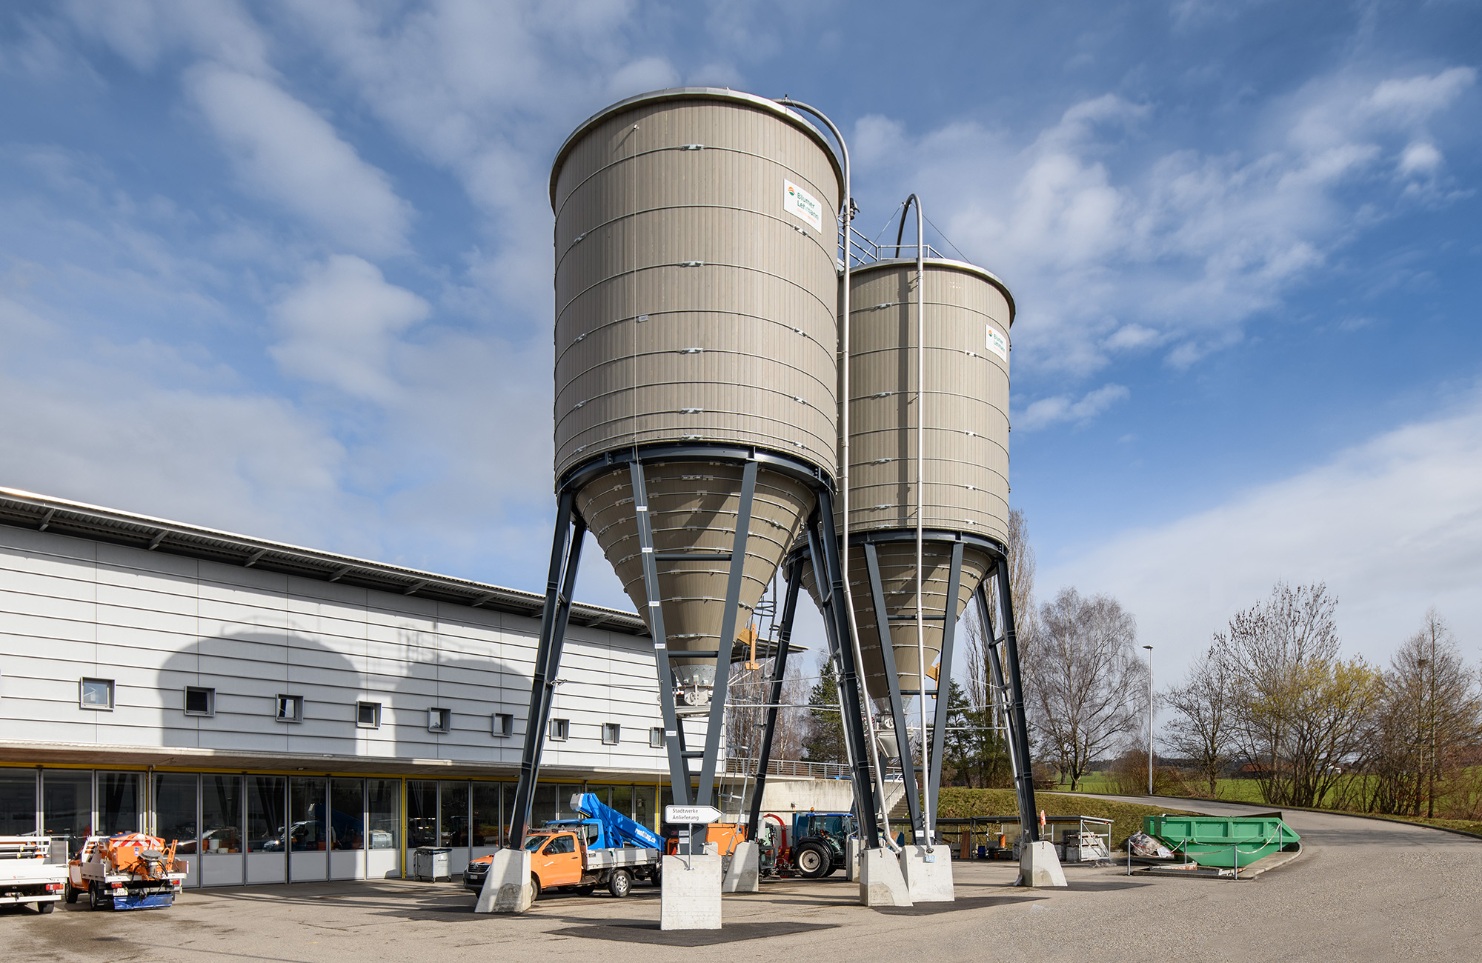 Silo installation of the city of Gossau with two round wooden silos